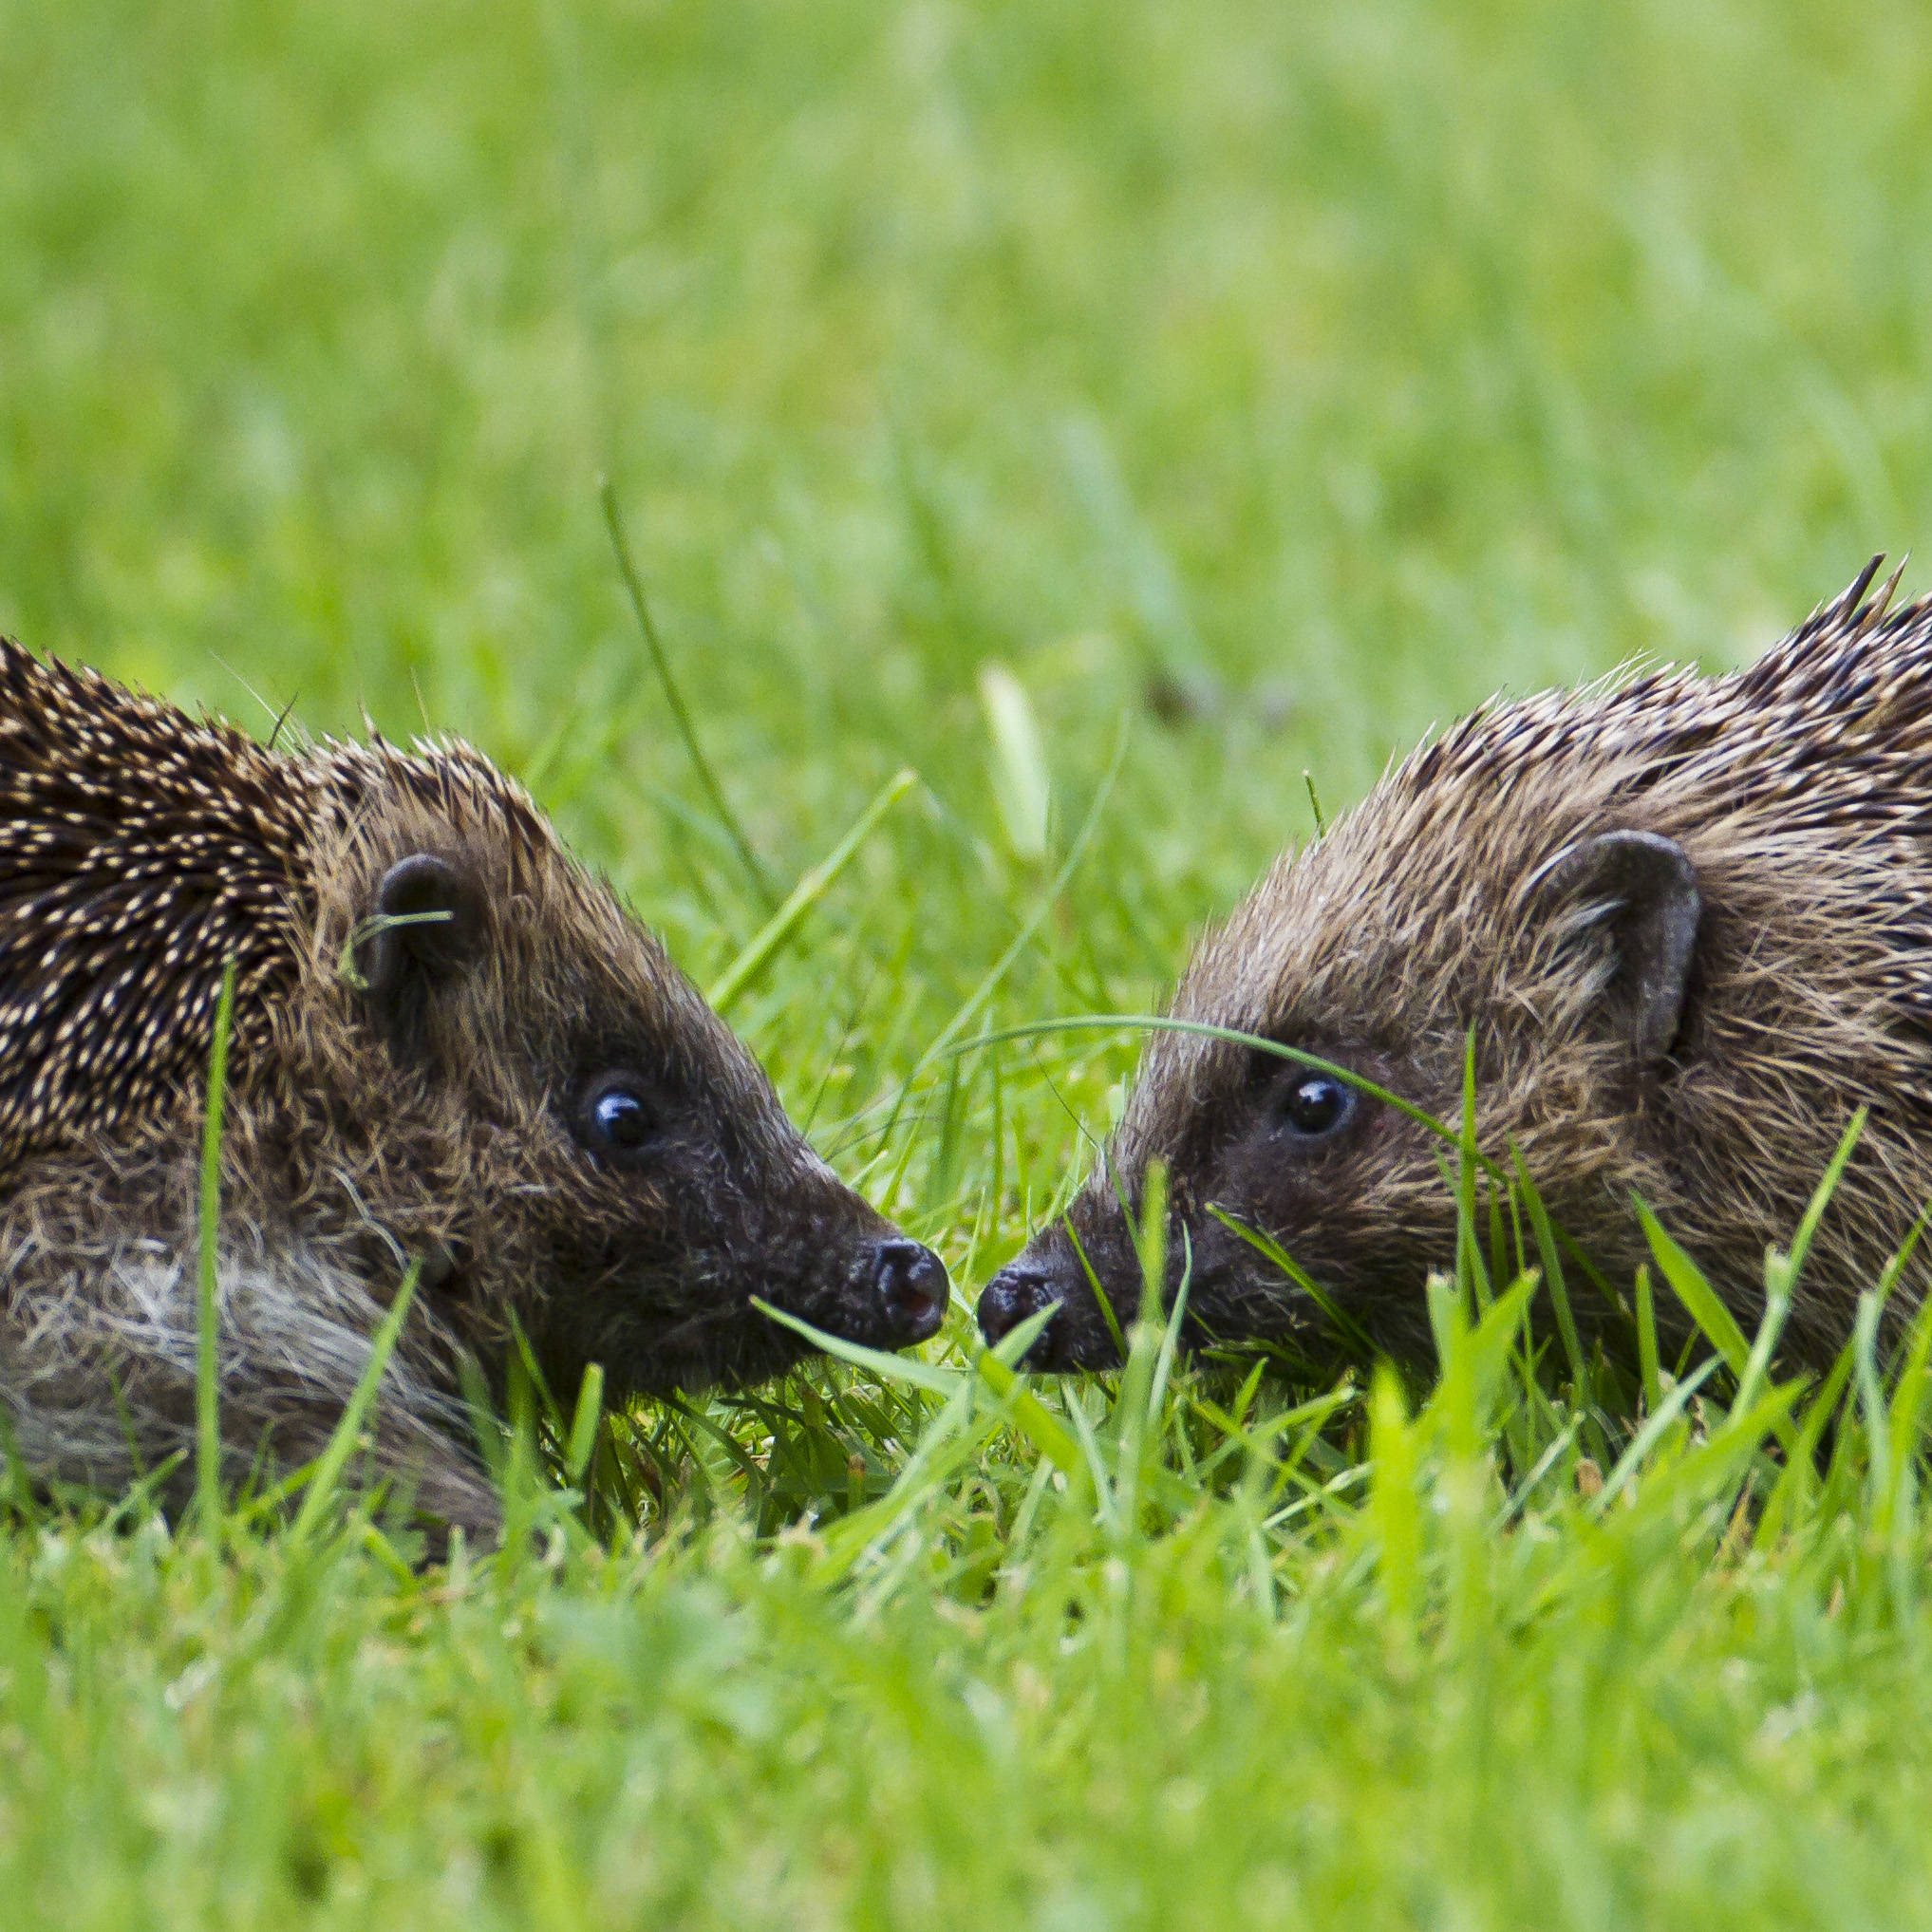 Two hedgehogs nose to nose